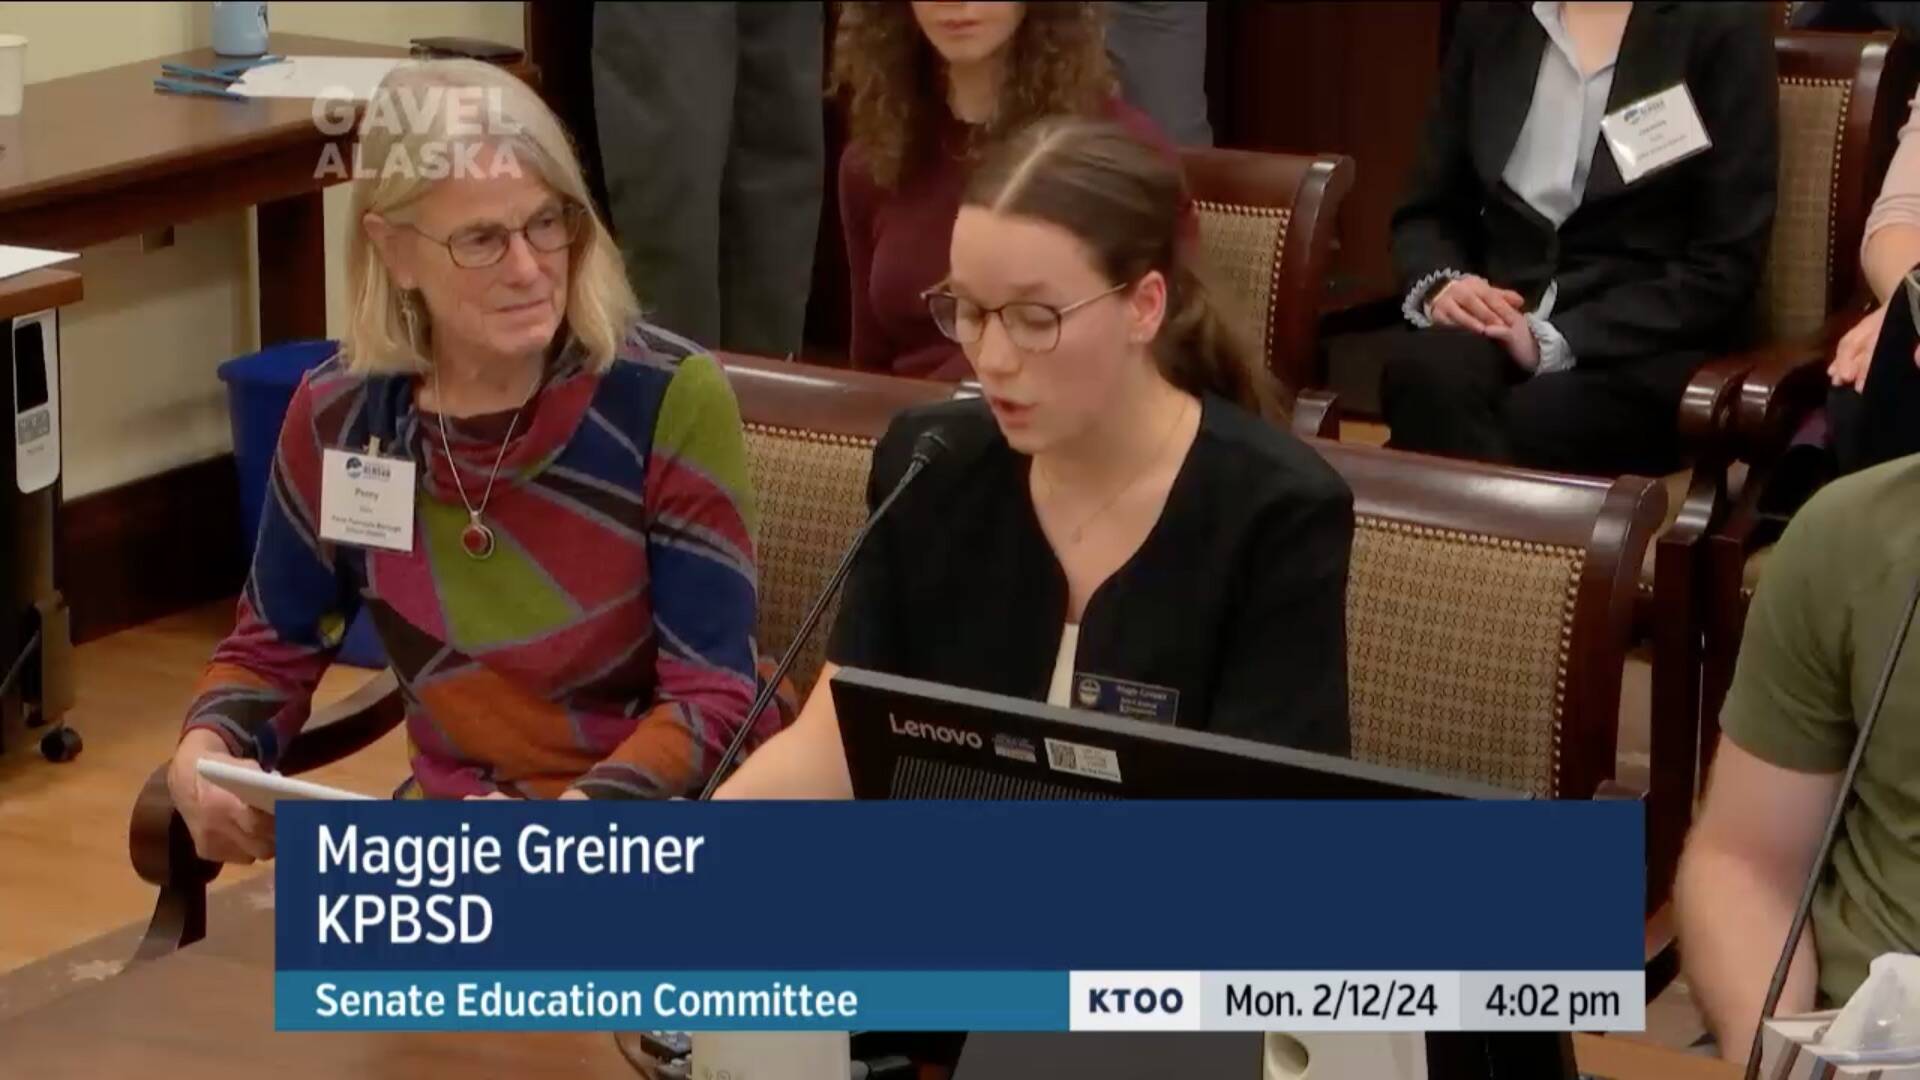 Nikiski Middle/High School student Maggie Grenier testifies in favor of a base student allocation increase before the Alaska Senate Education Committee on Monday, Feb. 12, 2024, in Juneau, Alaska. (Screenshot)
Nikiski Middle/High School student Maggie Grenier testifies in favor of a base student allocation increase before the Alaska Senate Education Committee on Monday, Feb. 12, 2024, in Juneau, Alaska. (Screenshot)